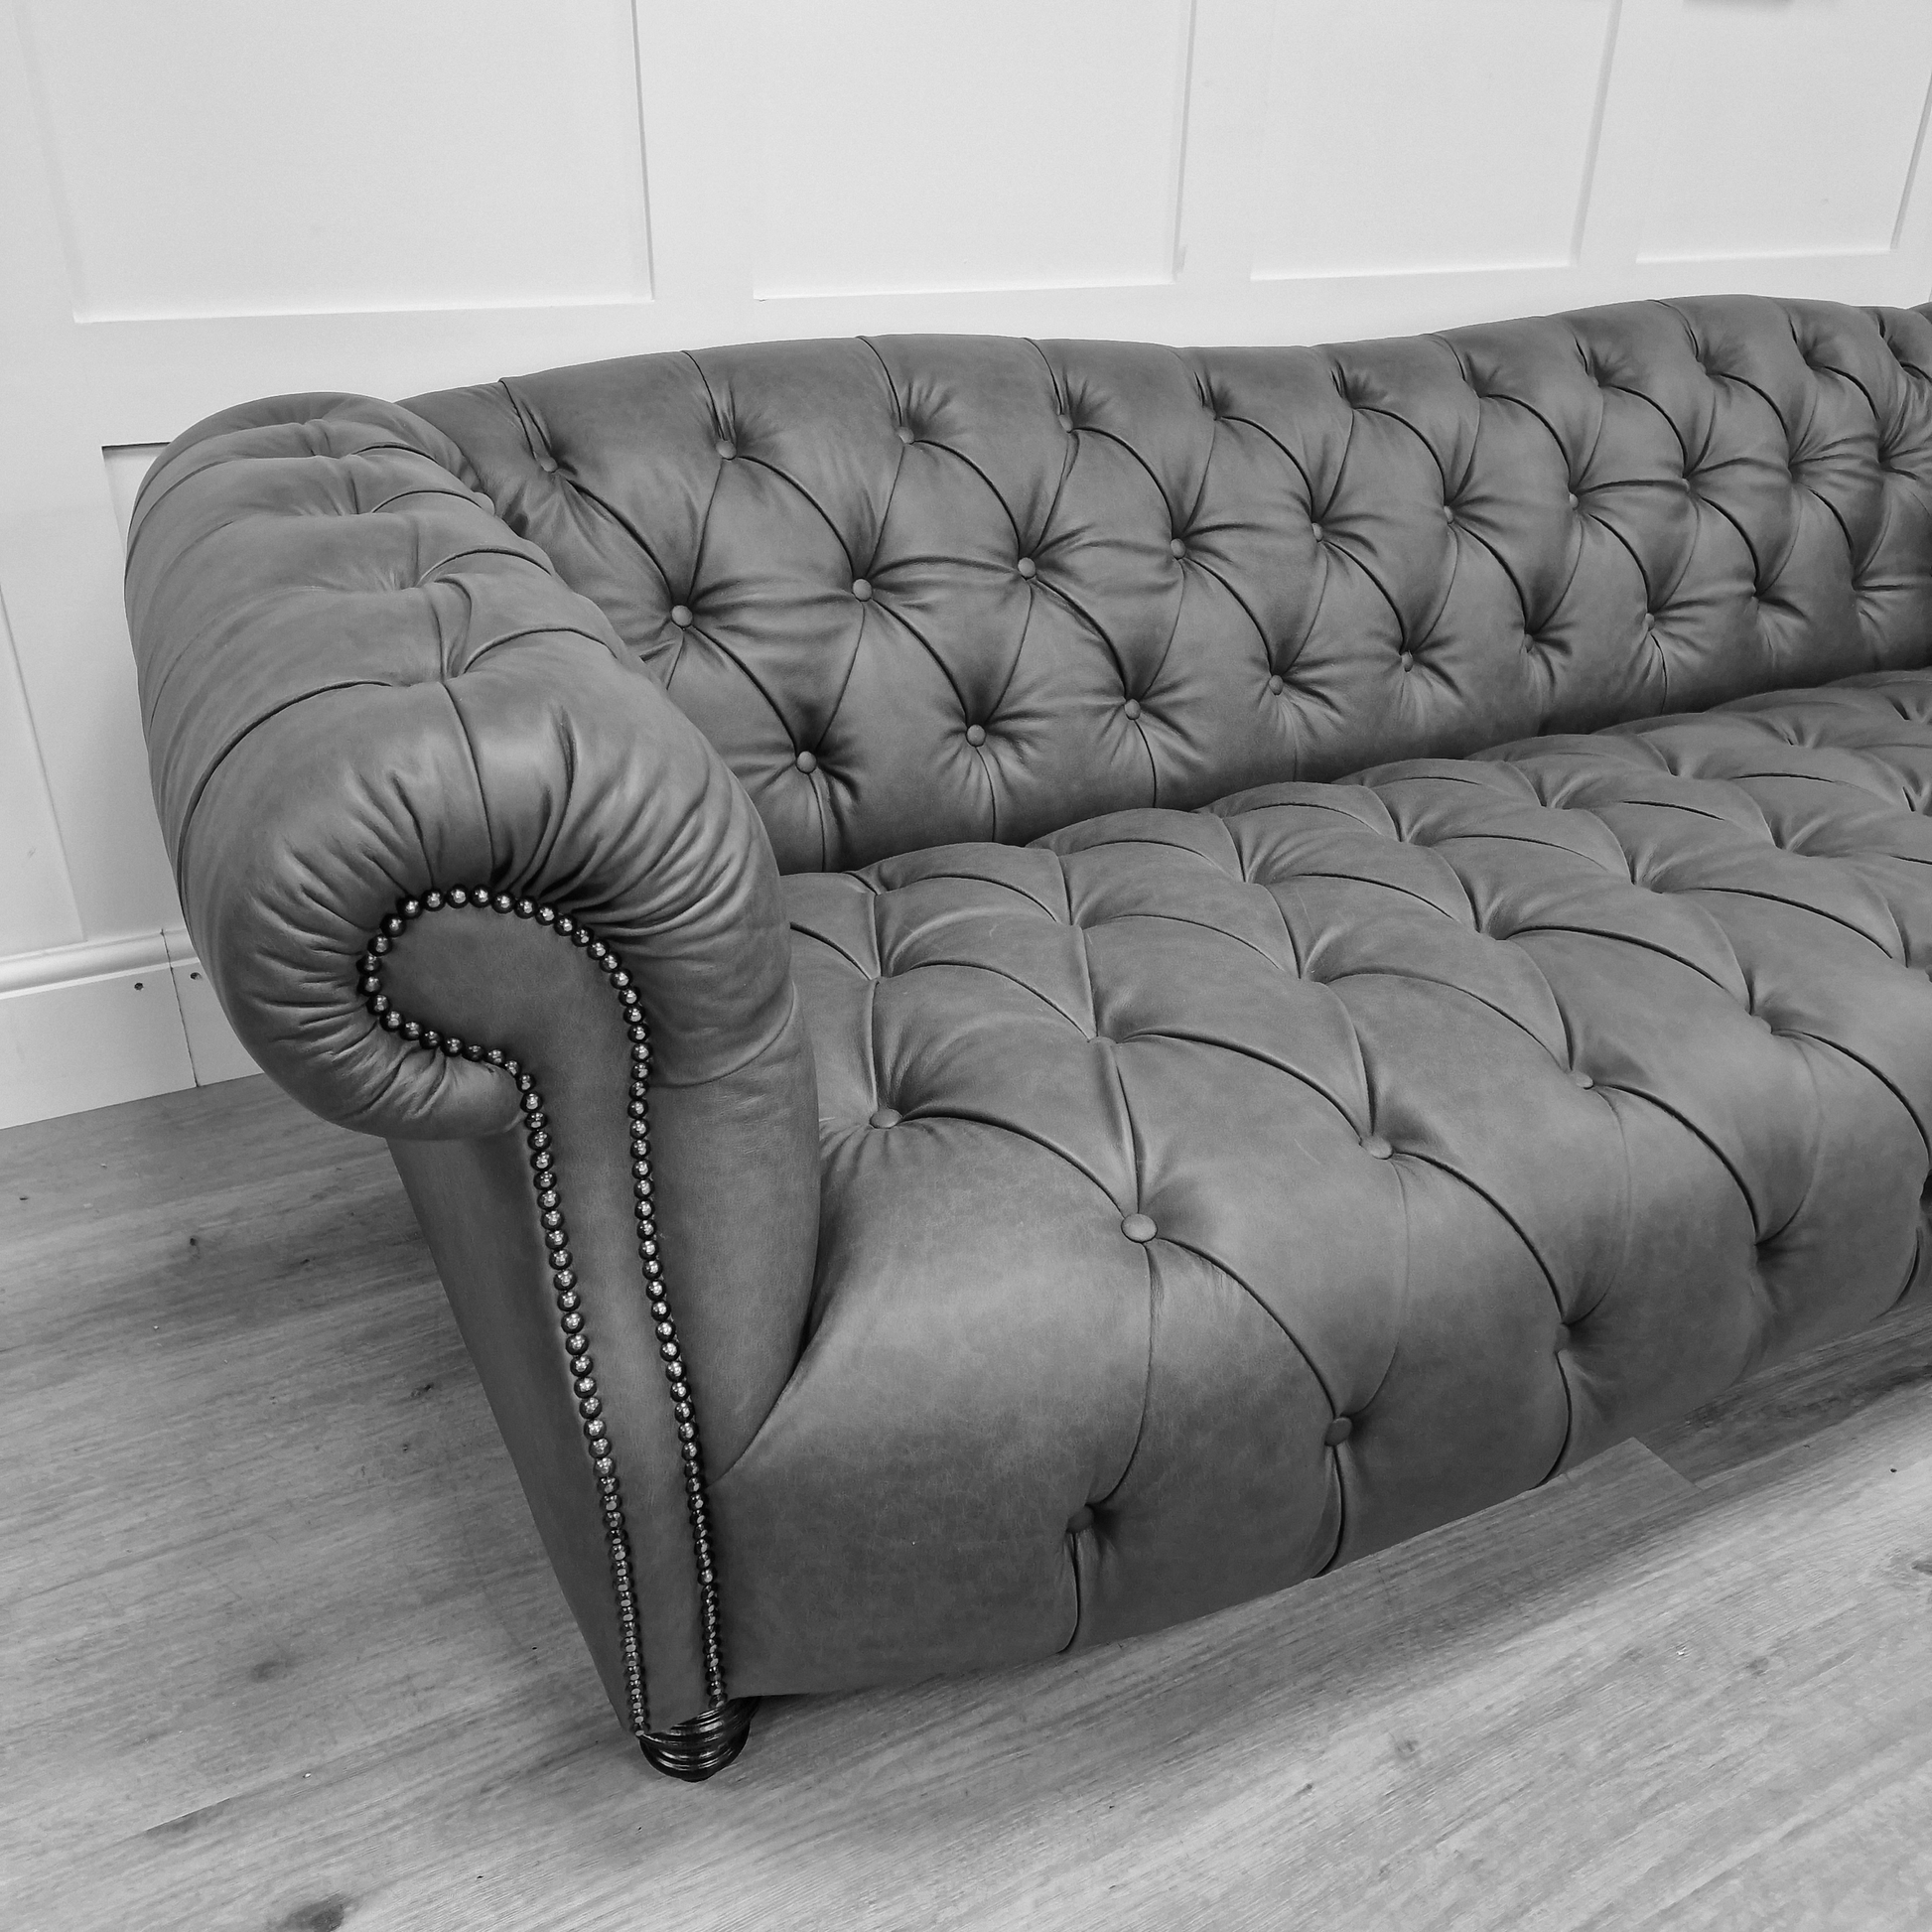 Bespoke Deep Buttoned Leather Chesterfield - Model 10 - Rydan Interiors